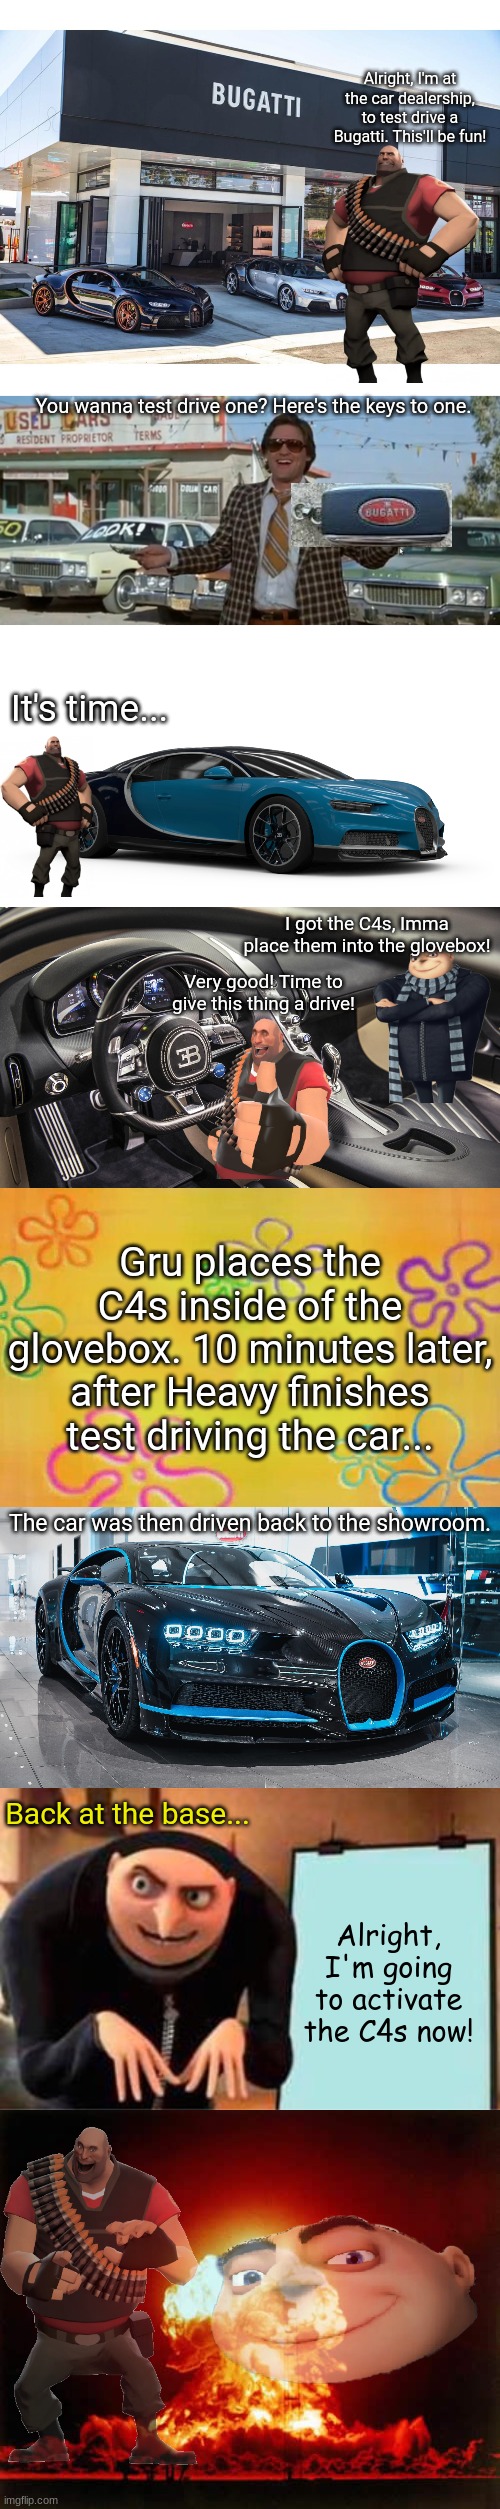 Gru and Heavy destroy a Bugatti | Alright, I'm at the car dealership, to test drive a Bugatti. This'll be fun! You wanna test drive one? Here's the keys to one. It's time... I got the C4s, Imma place them into the glovebox! Very good! Time to give this thing a drive! Gru places the C4s inside of the glovebox. 10 minutes later, after Heavy finishes test driving the car... The car was then driven back to the showroom. Back at the base... Alright, I'm going to activate the C4s now! | image tagged in car dealership,used car dealer,bugatti chiron,bugatti chiron interior,spongebob time card background,memes | made w/ Imgflip meme maker